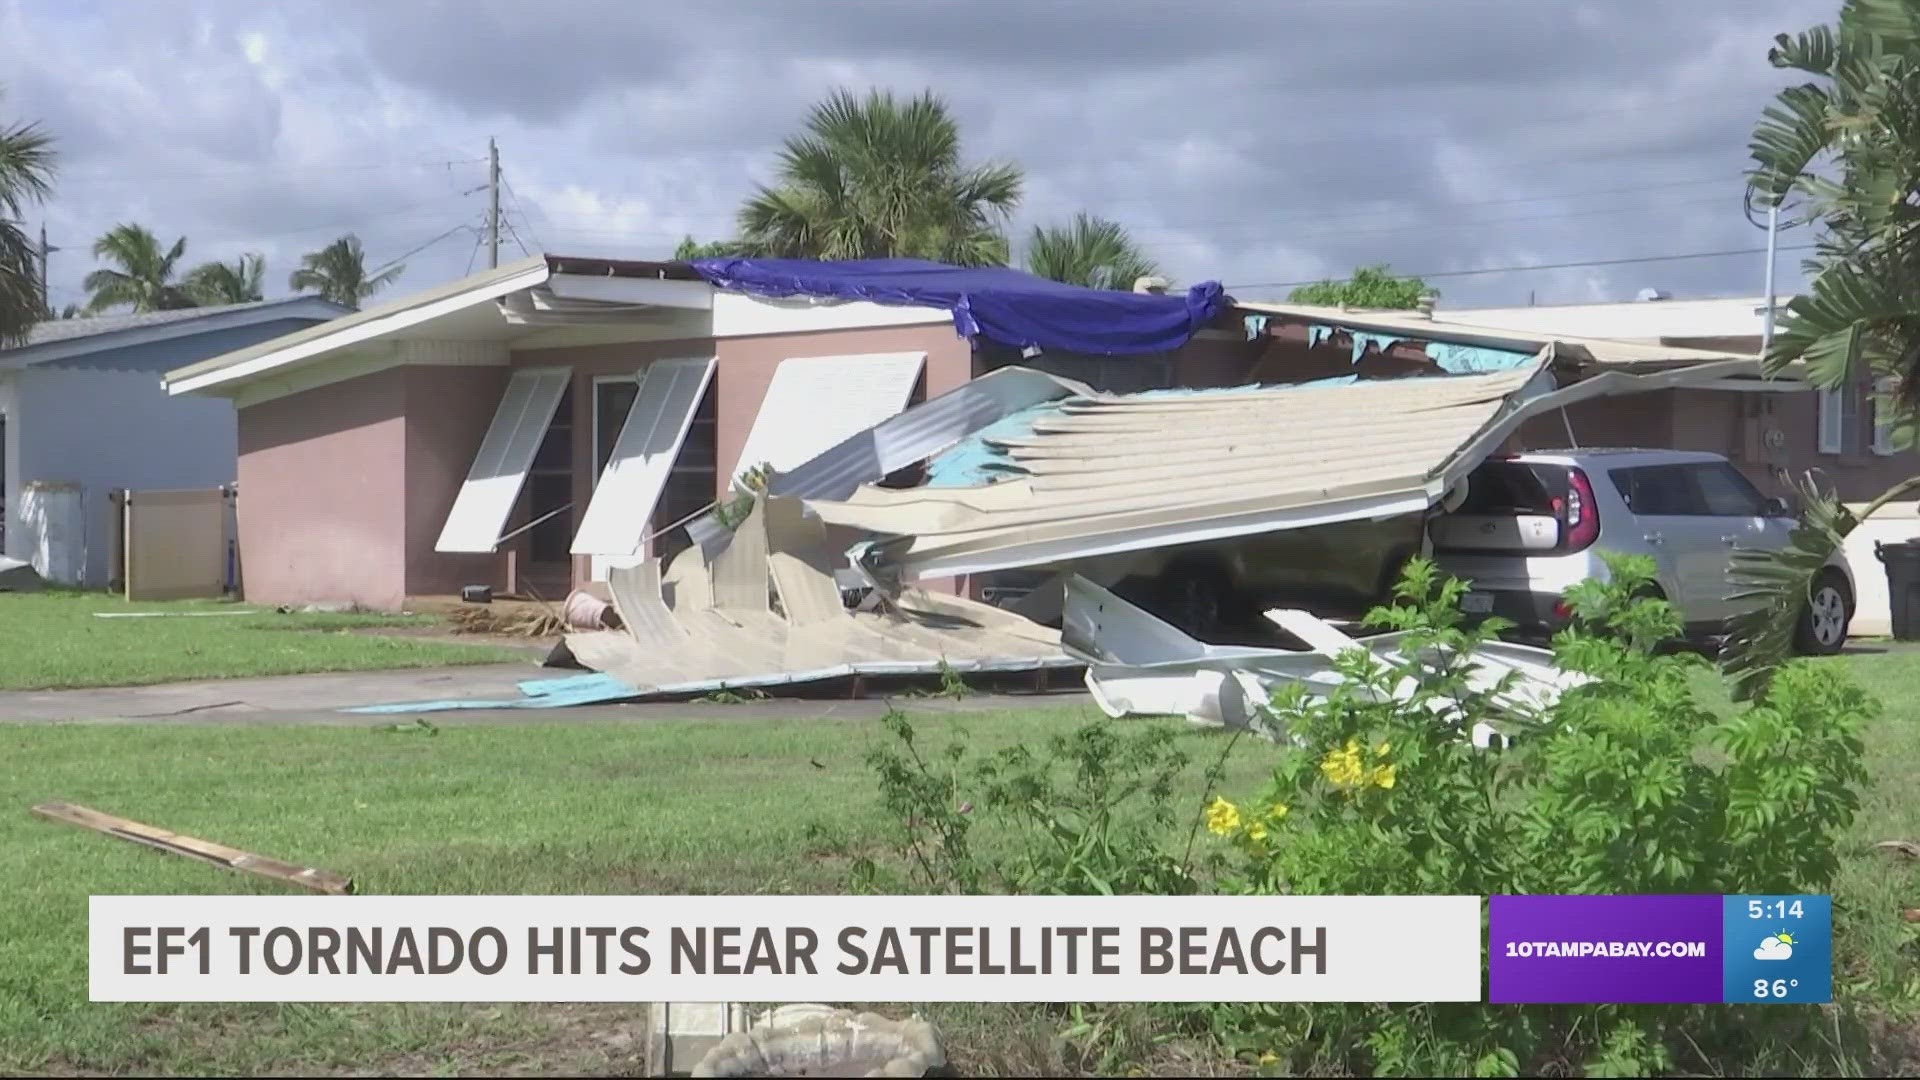 The National Weather Services confirmed an EF-1 tornado hit South Patrick Shores, just south of Cocoa Beach.